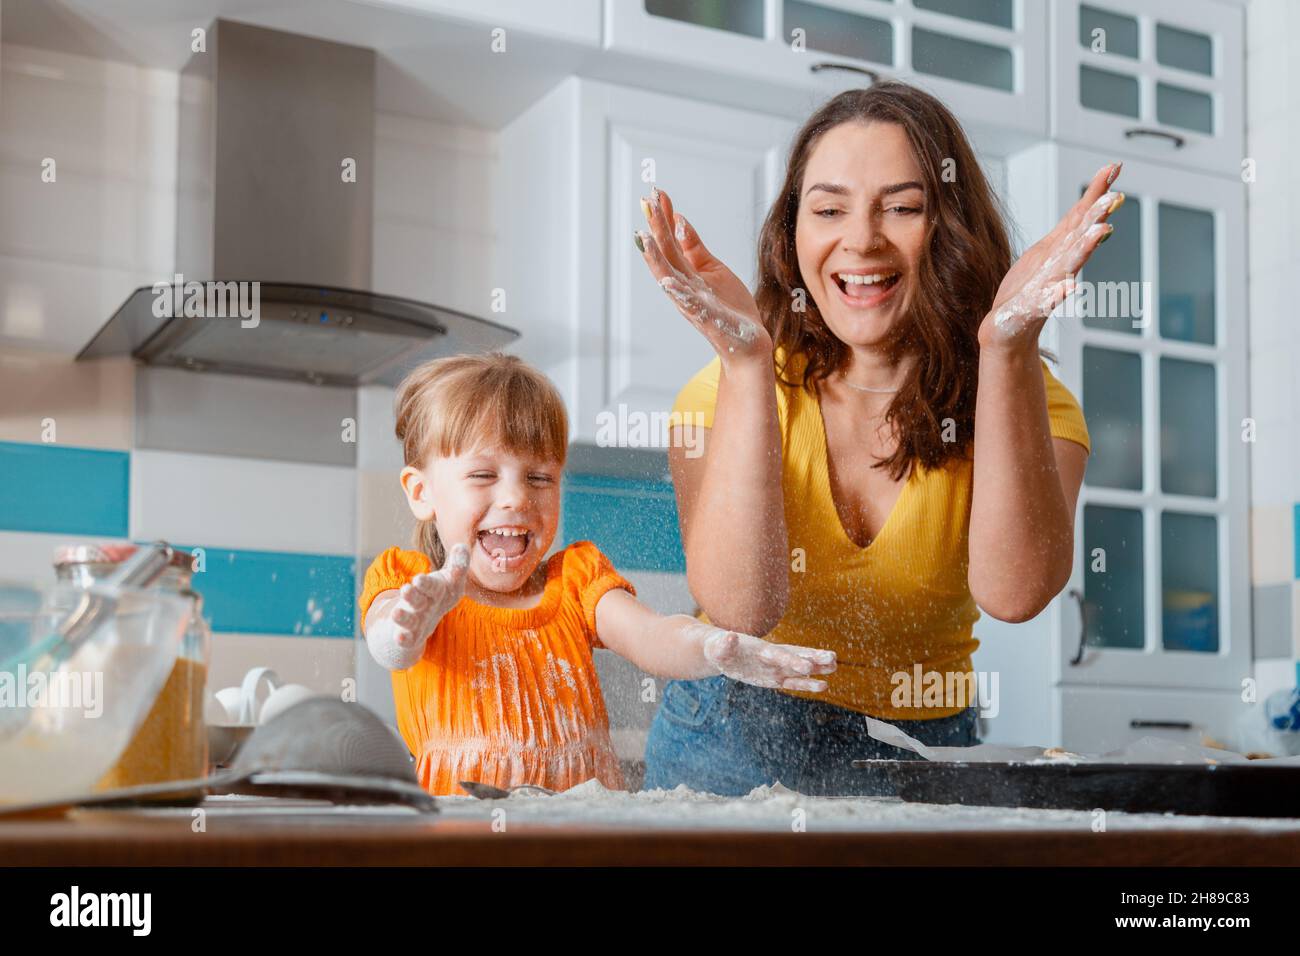 Happy laughing mother and daughter preparing baking throw flour in kitchen together. Family mom and child kid enjoys common leisure time cooking food Stock Photo